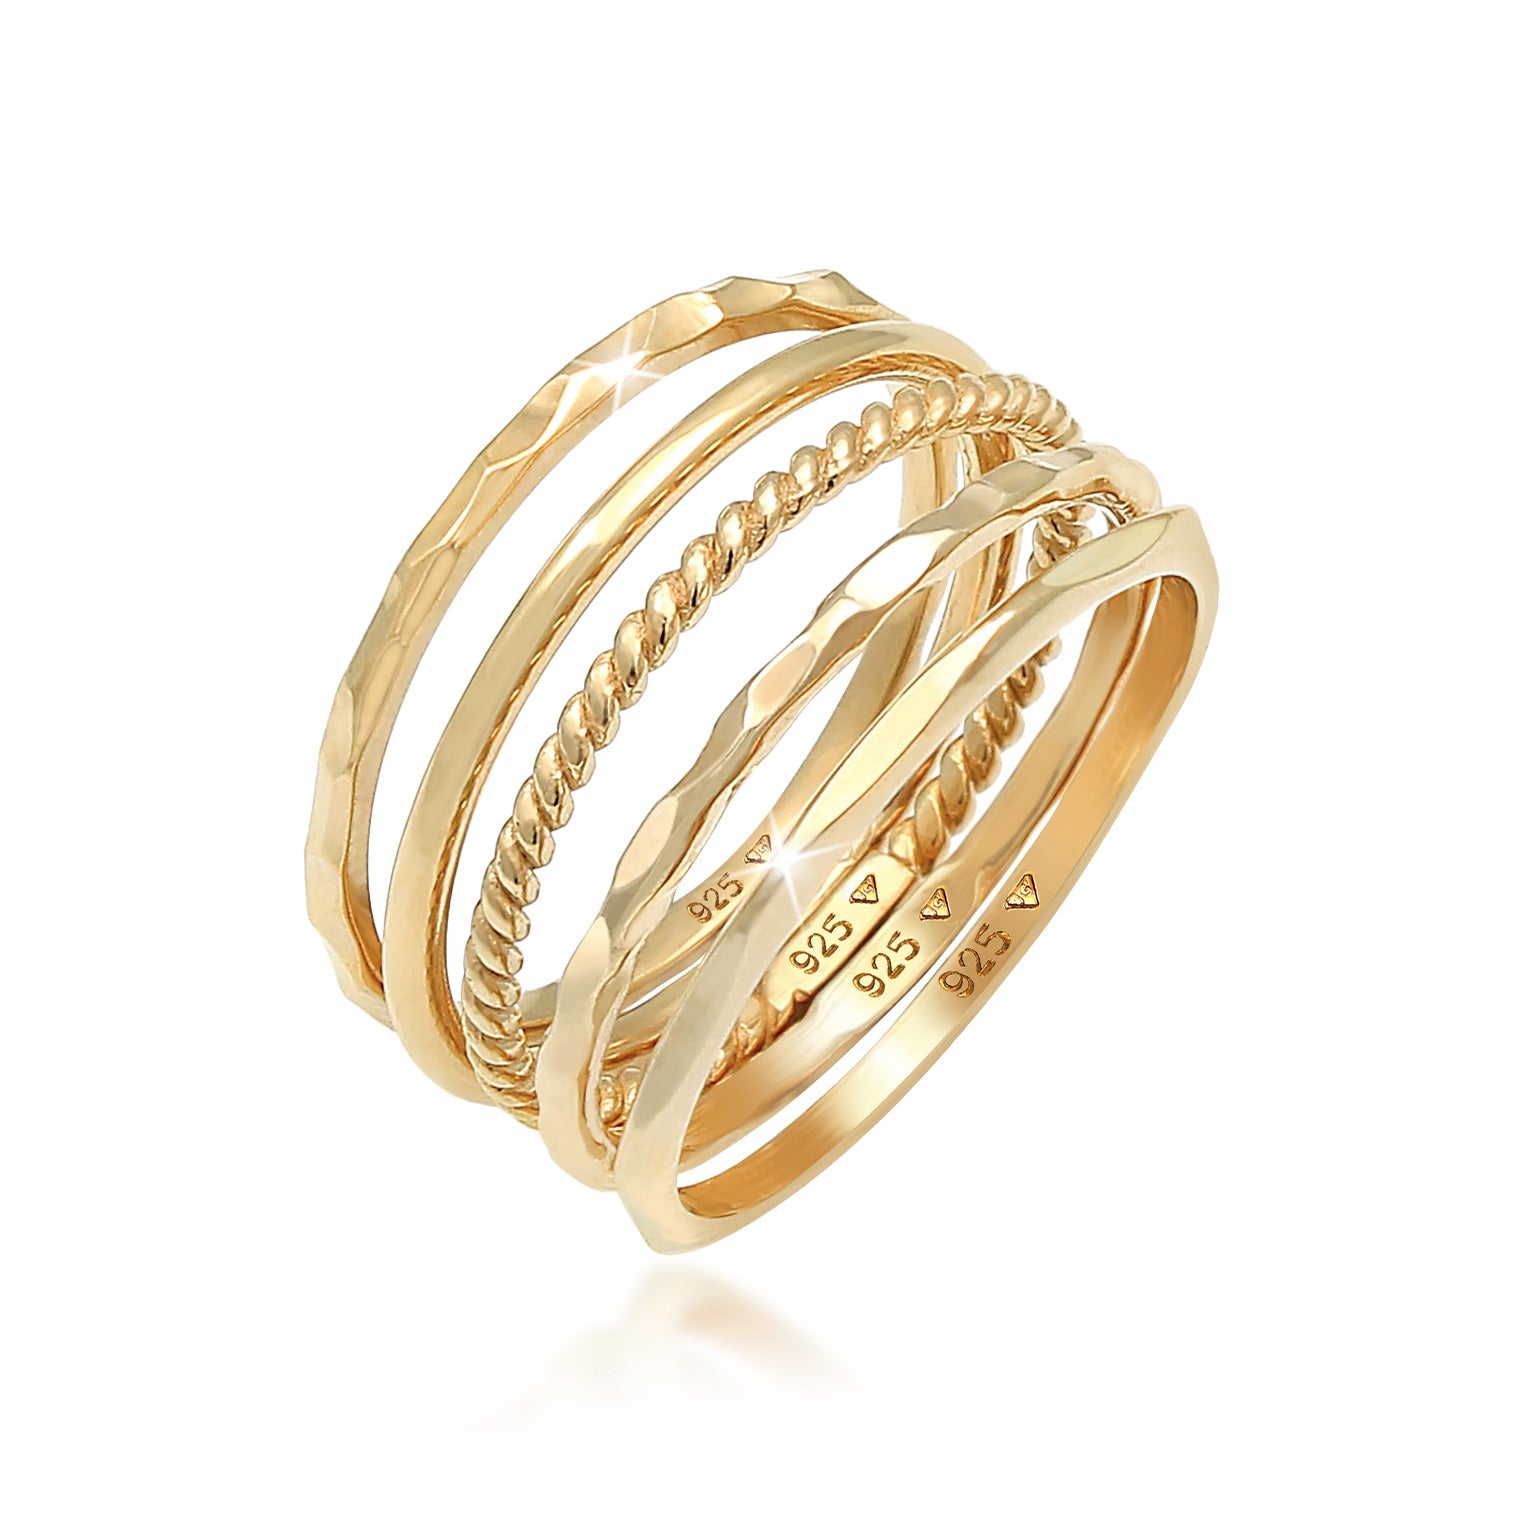 Rings made of silver or gold, buy from Elli